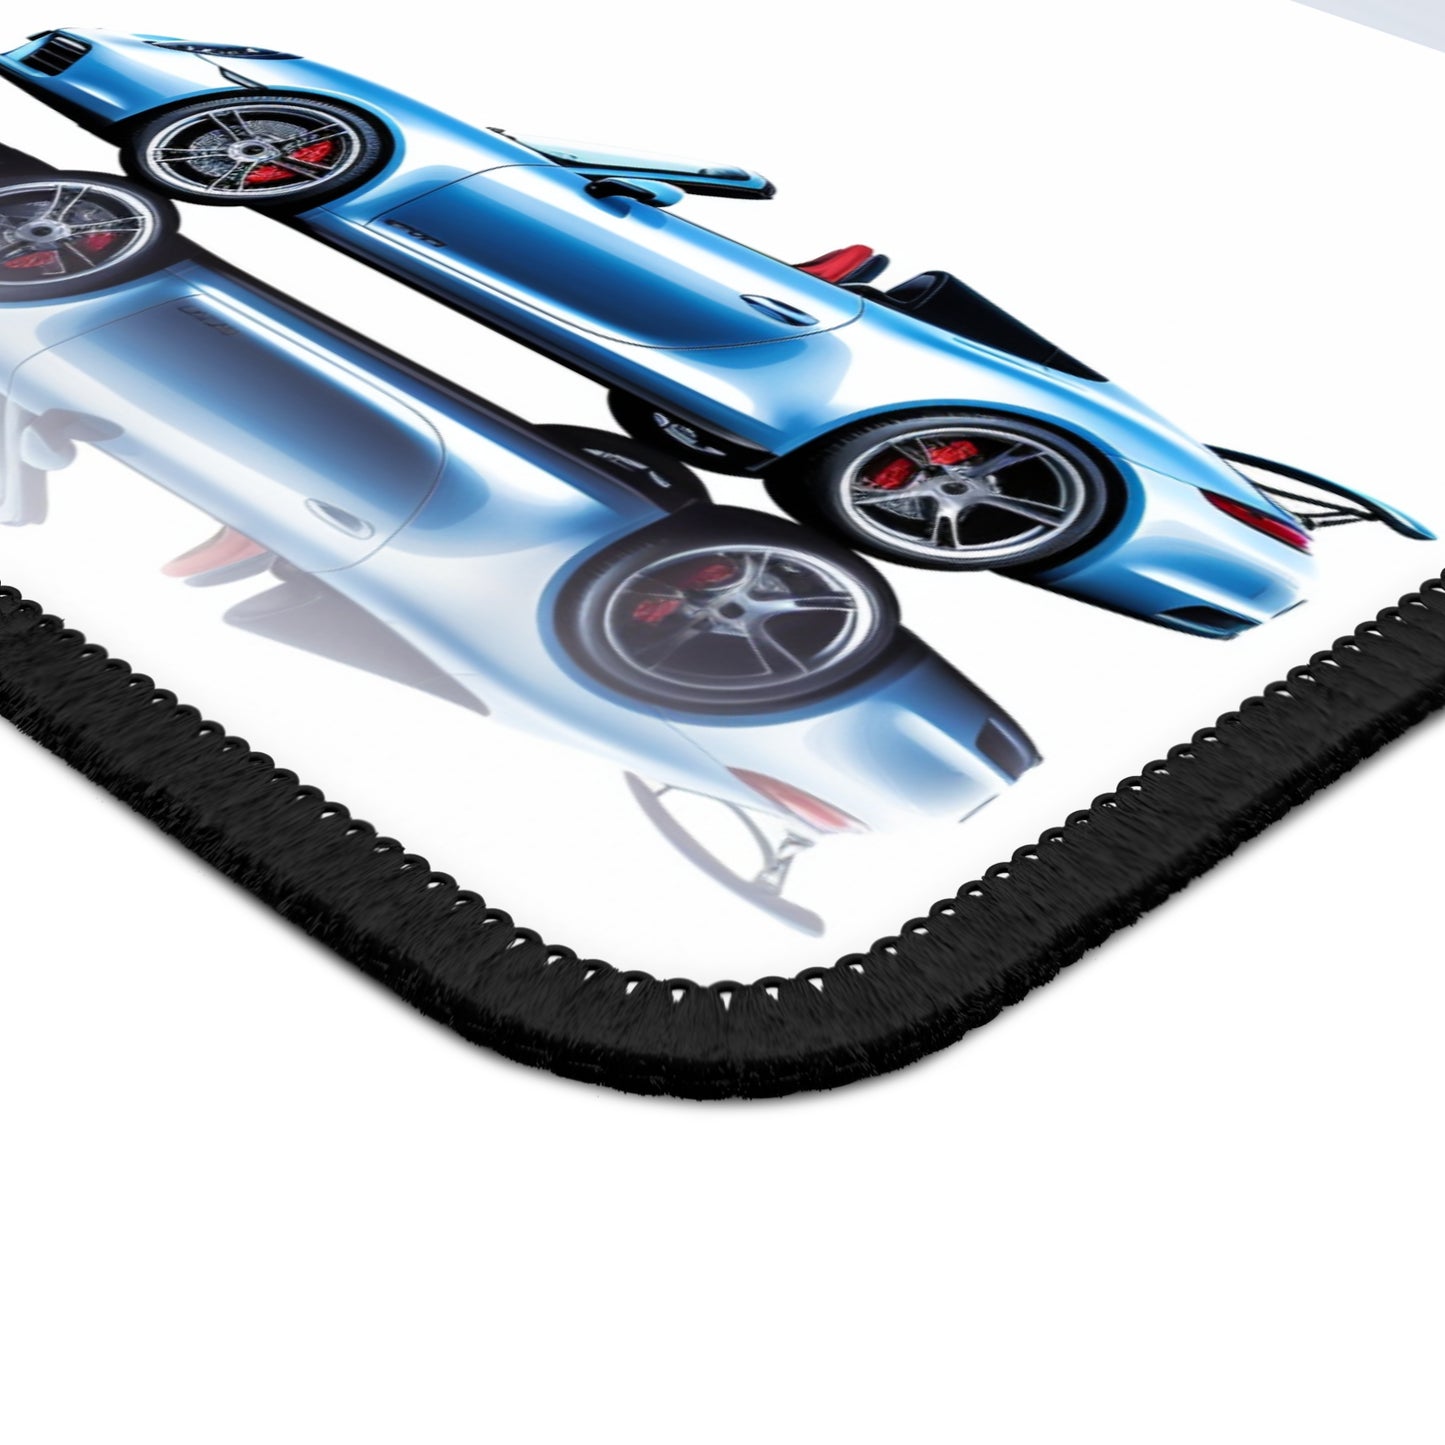 Gaming Mouse Pad  911 Speedster on water 5